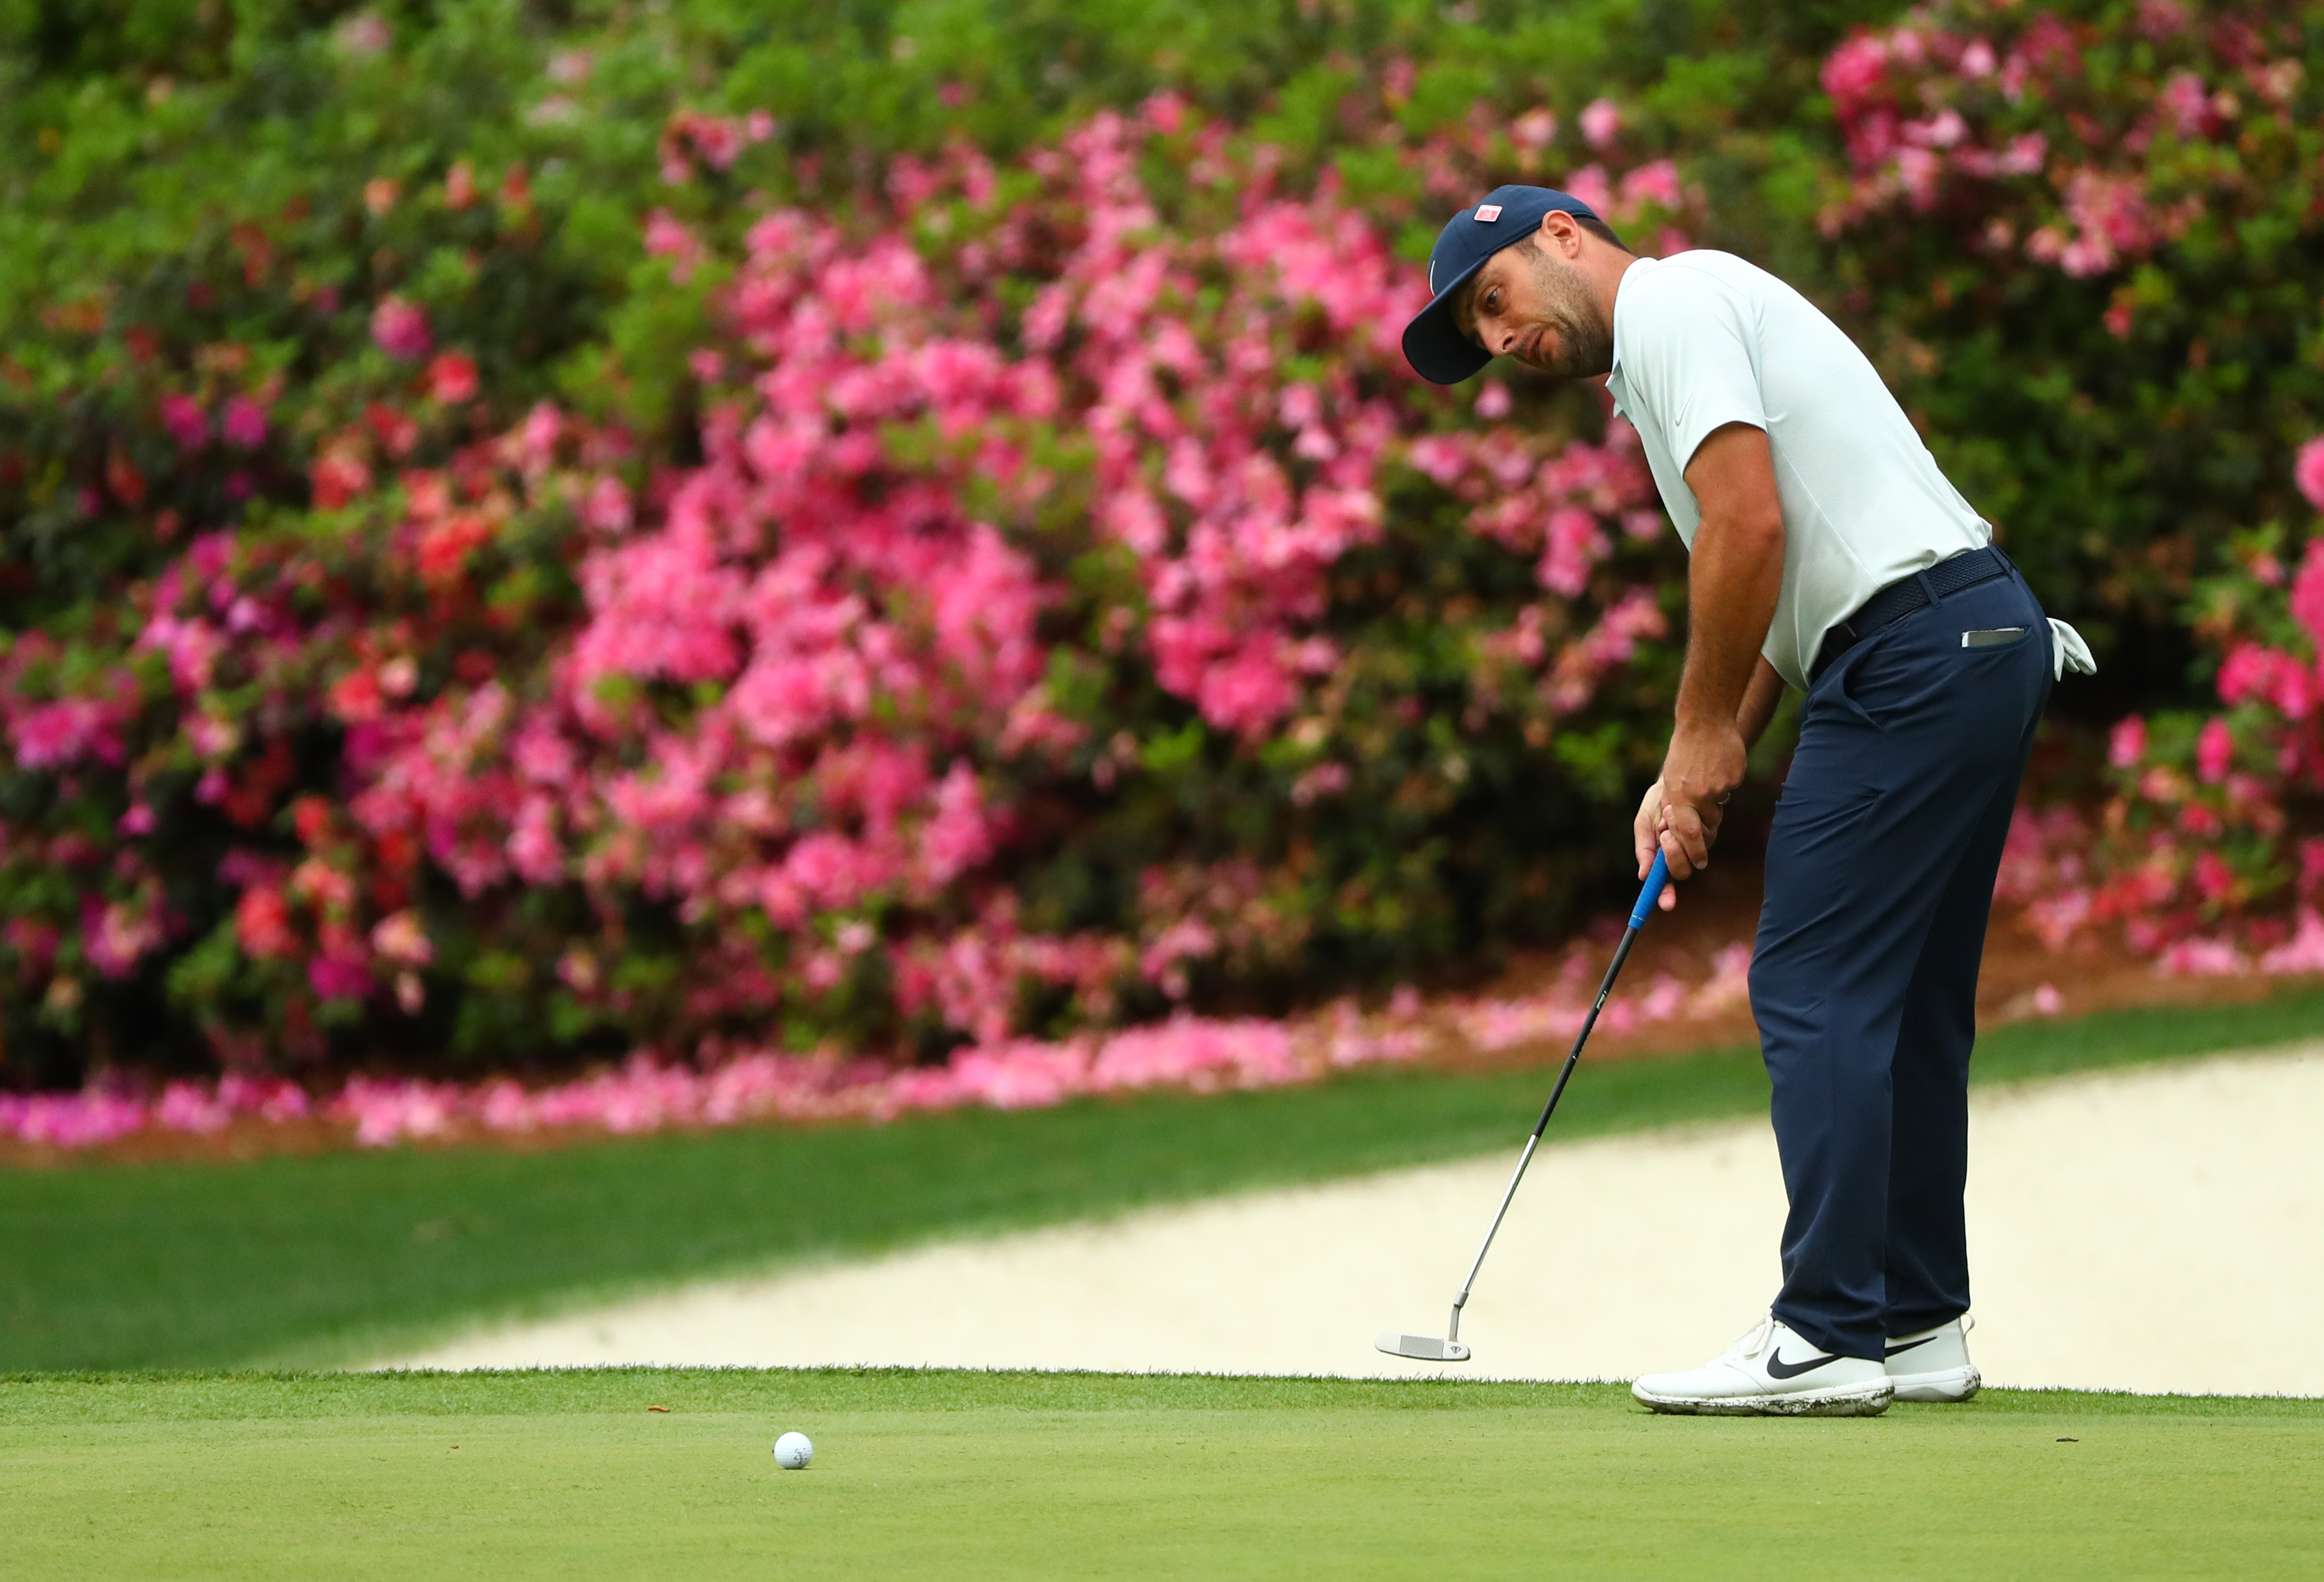 Steady for so long, Francesco Molinari's wet miscues cost him Masters